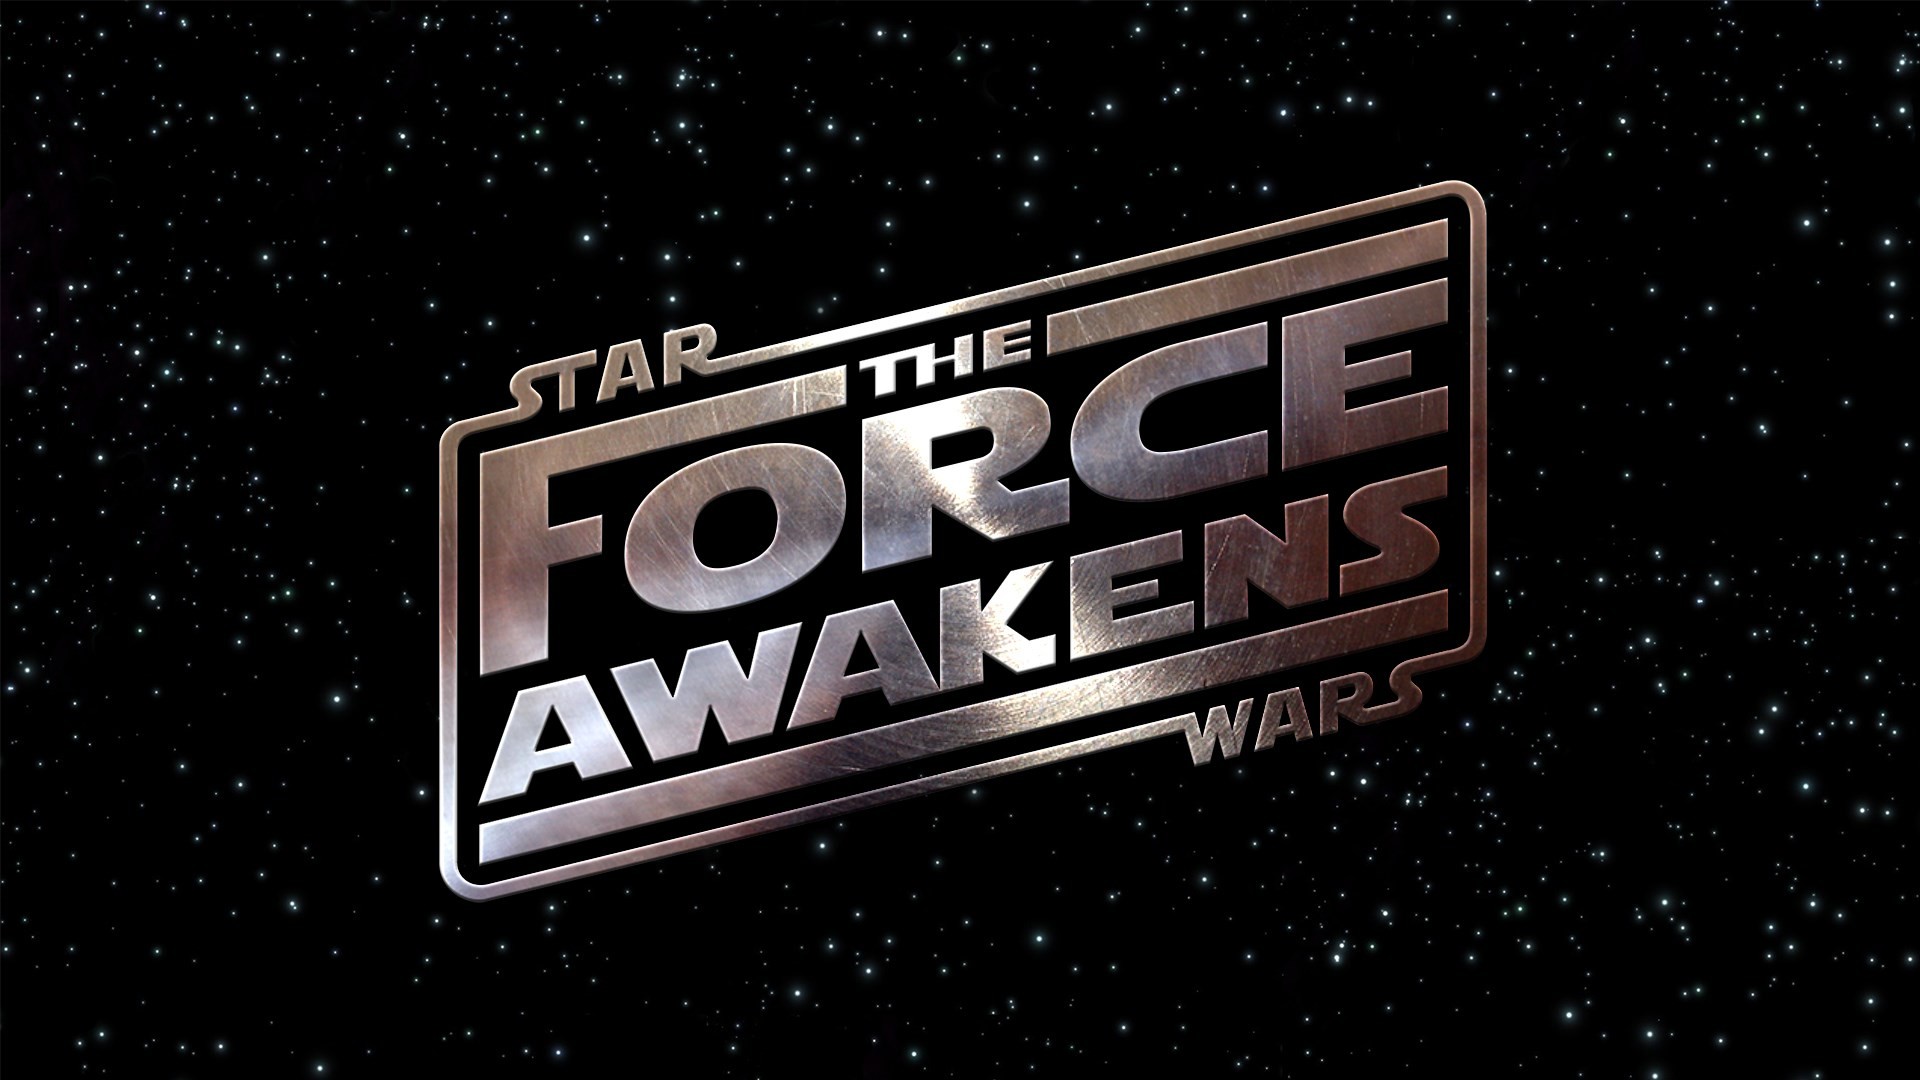 1920x1080 wallpapers free star wars episode vii the force awakens